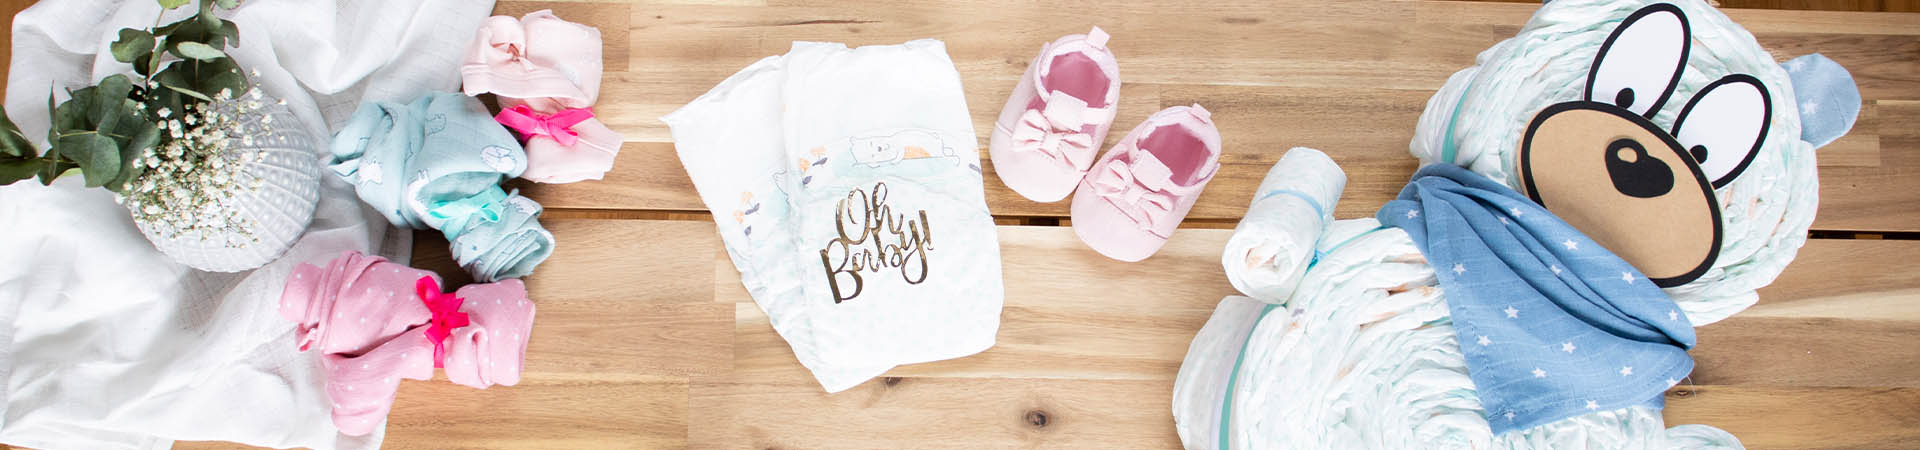 Baby gift ideas in a neutral design.